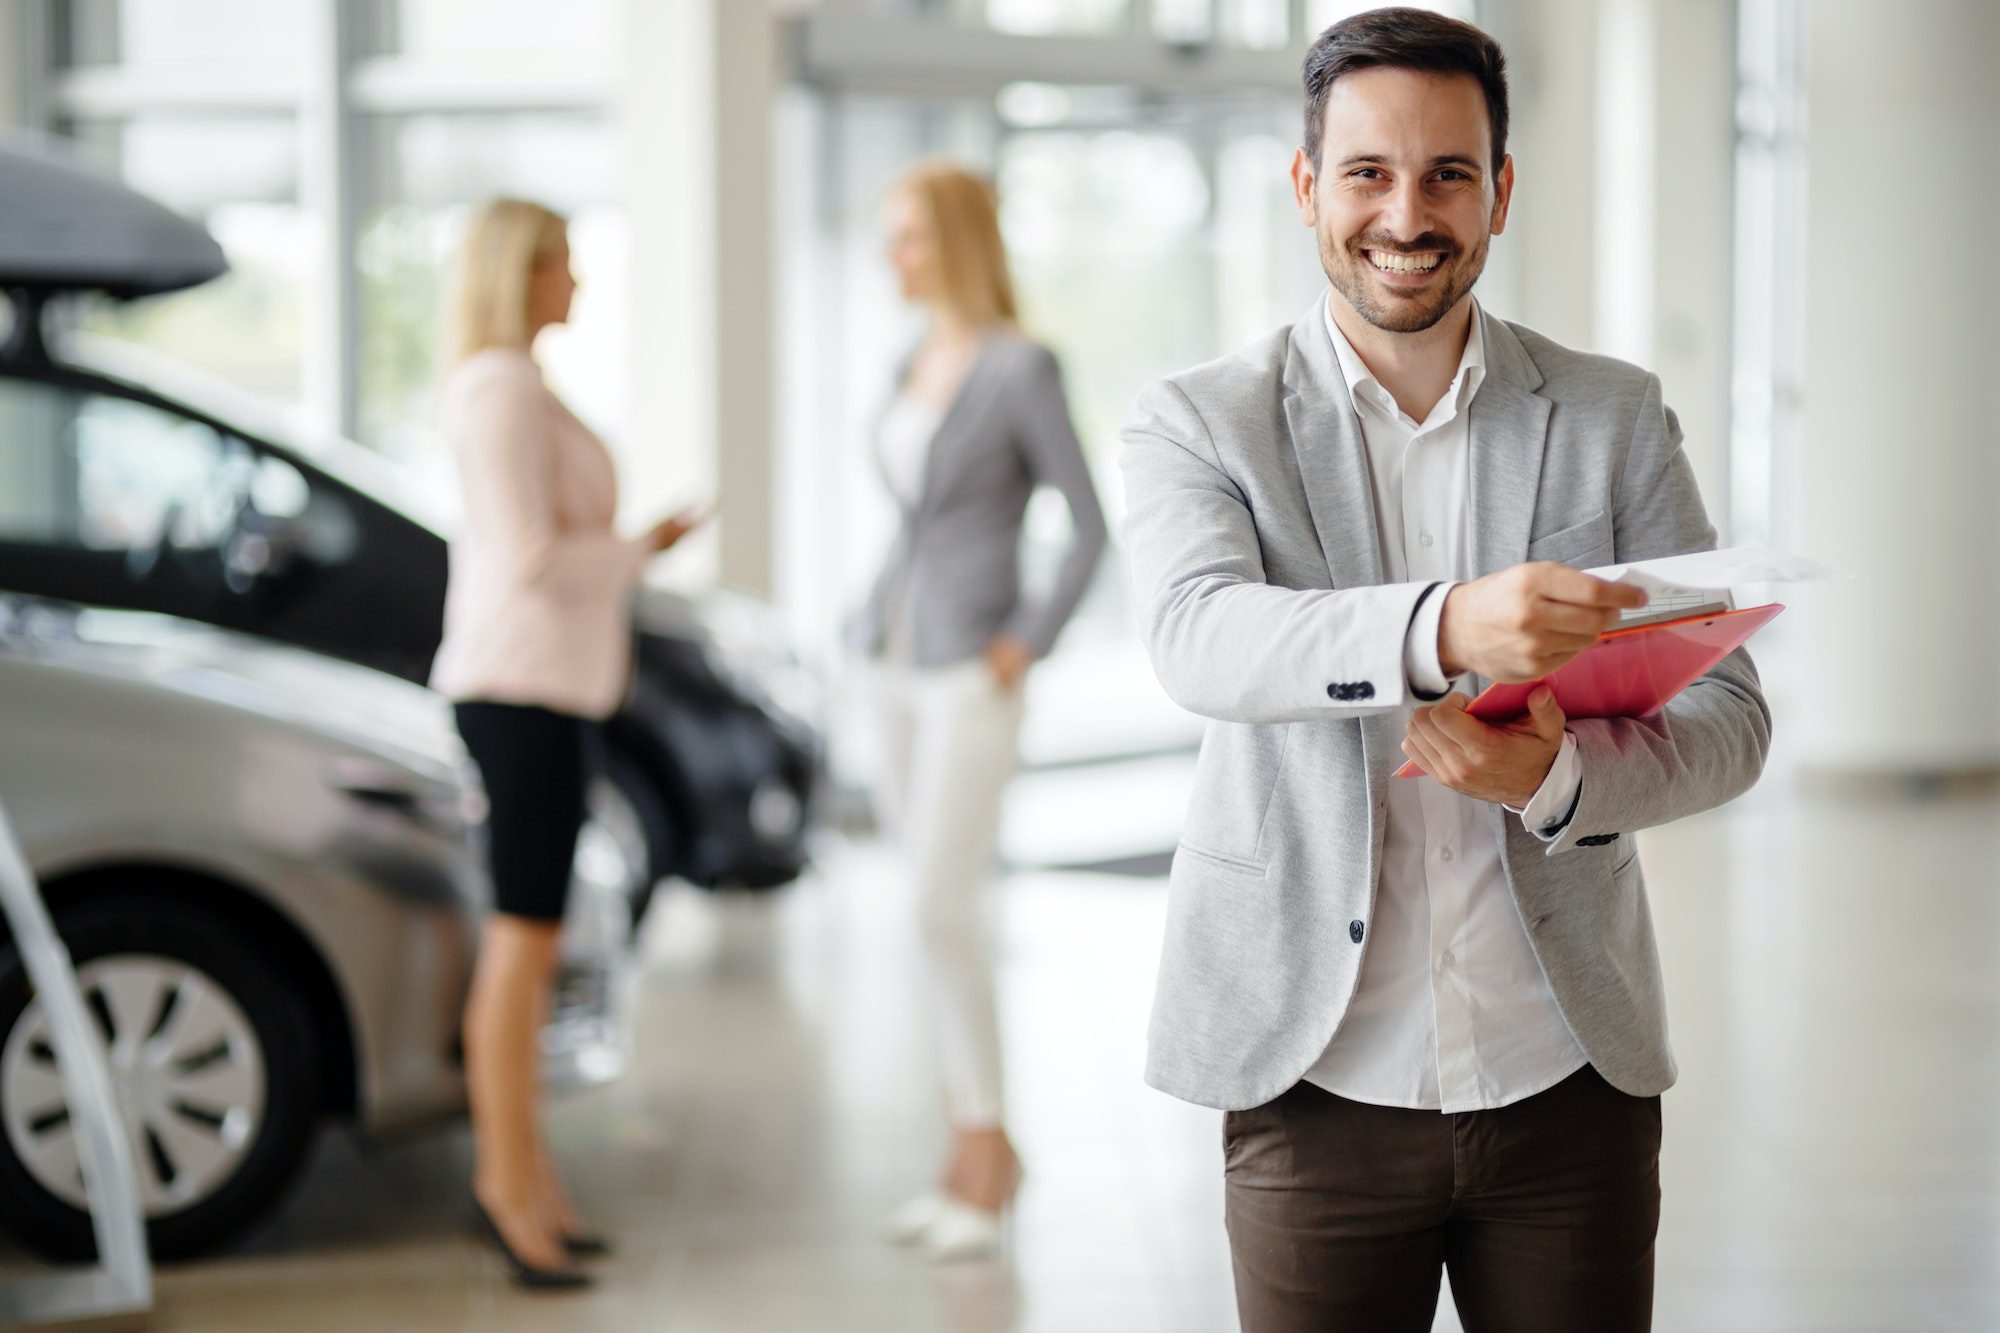 The link between strong leadership and customer satisfaction in the car dealership industry